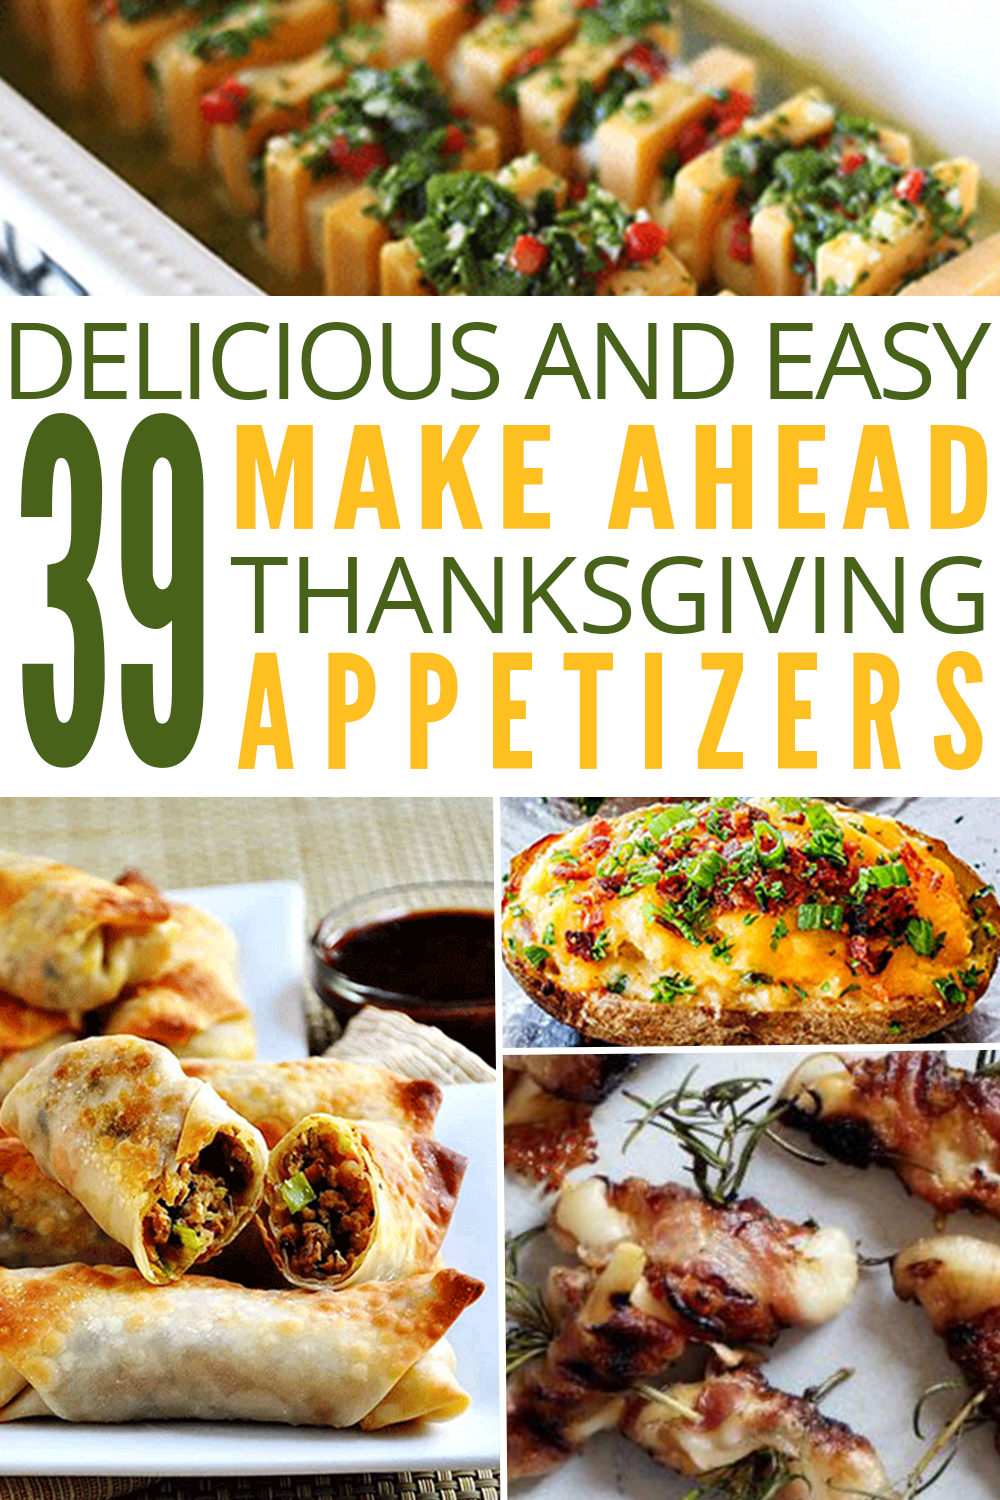 39 Easy and Delicious Make-Ahead Thanksgiving Appetizers | Edit + Nest -   19 thanksgiving appetizers make ahead ideas